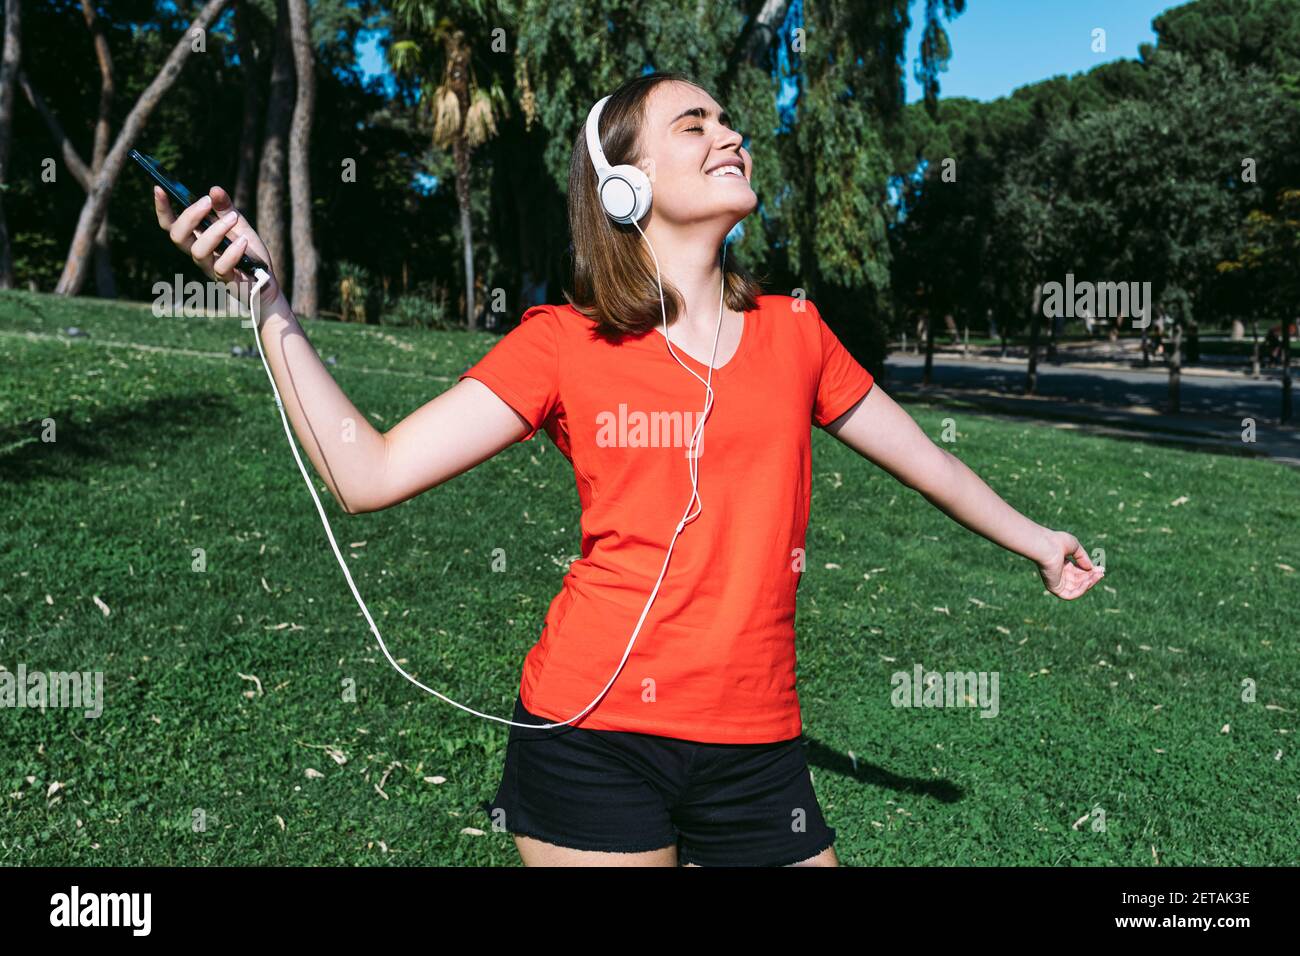 Young blonde wearing a red shirt feels free listening to music with headphones on in a park Stock Photo